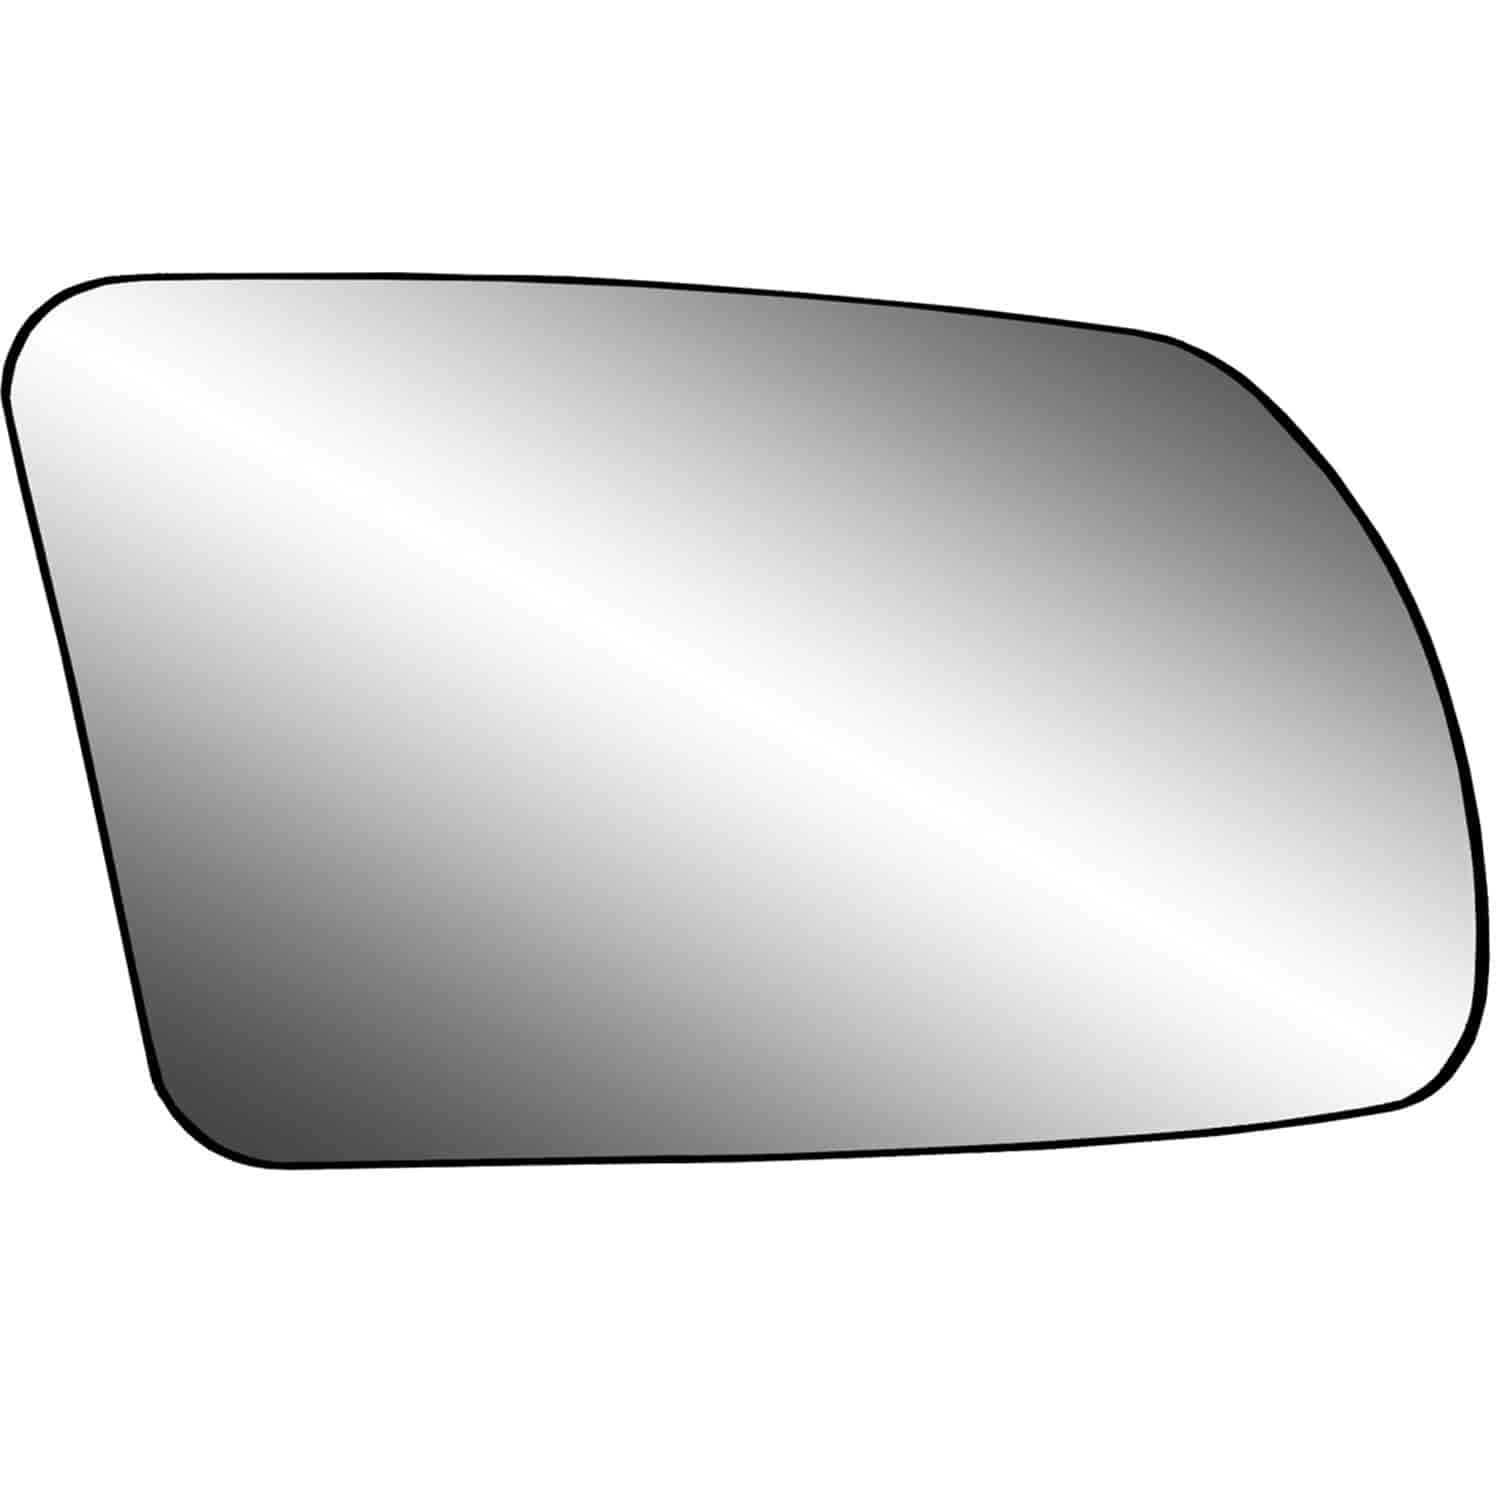 Replacement Glass Assembly for 08-13 Altima Coupe foldaway mirror; 07-11 Altima Hybrid foldaway; 07-